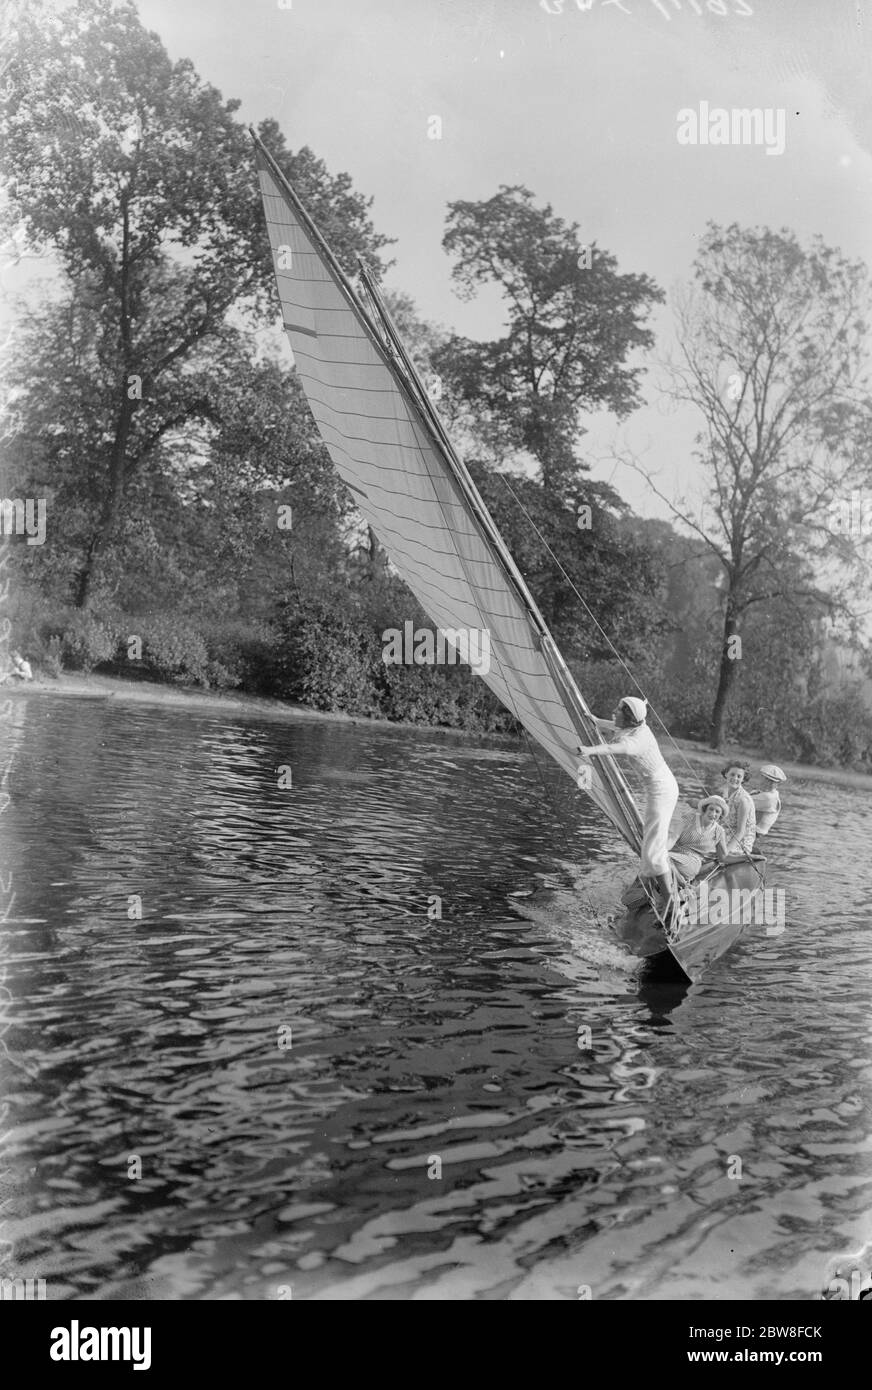 Sailing thrills in the Heart of London . Small sailing yachts have just been installed to add to the pleasures of Londoners on the lake , with its picturesque surroundings , in Regents Park . One of the yachts heeling over in a delightfully welcome breeze during the wave . 18 August 1932 Stock Photo